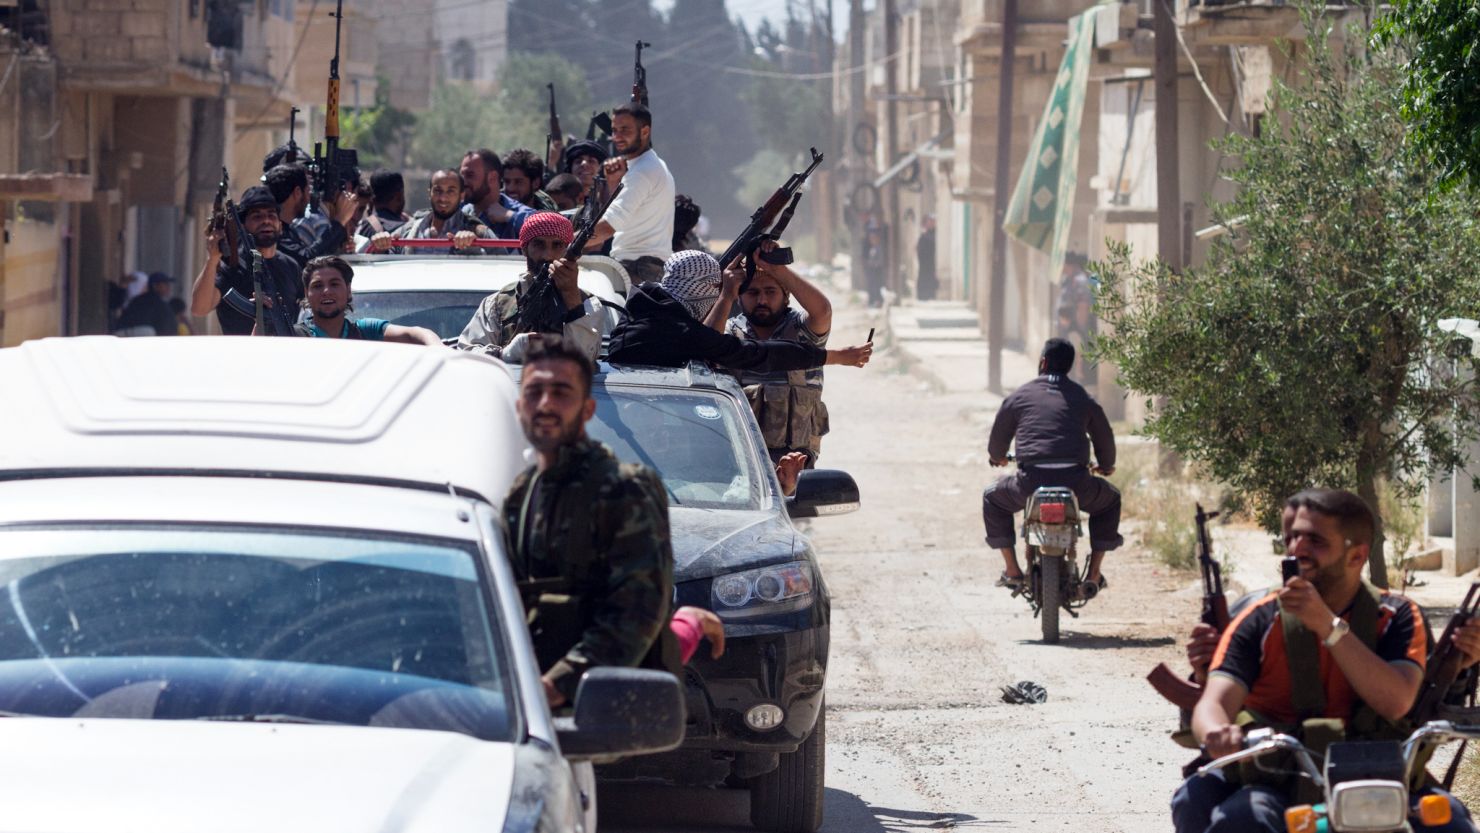 Members of the Free Syrian Army return to Qusayr after an attack near the Lebanese border on Saturday.